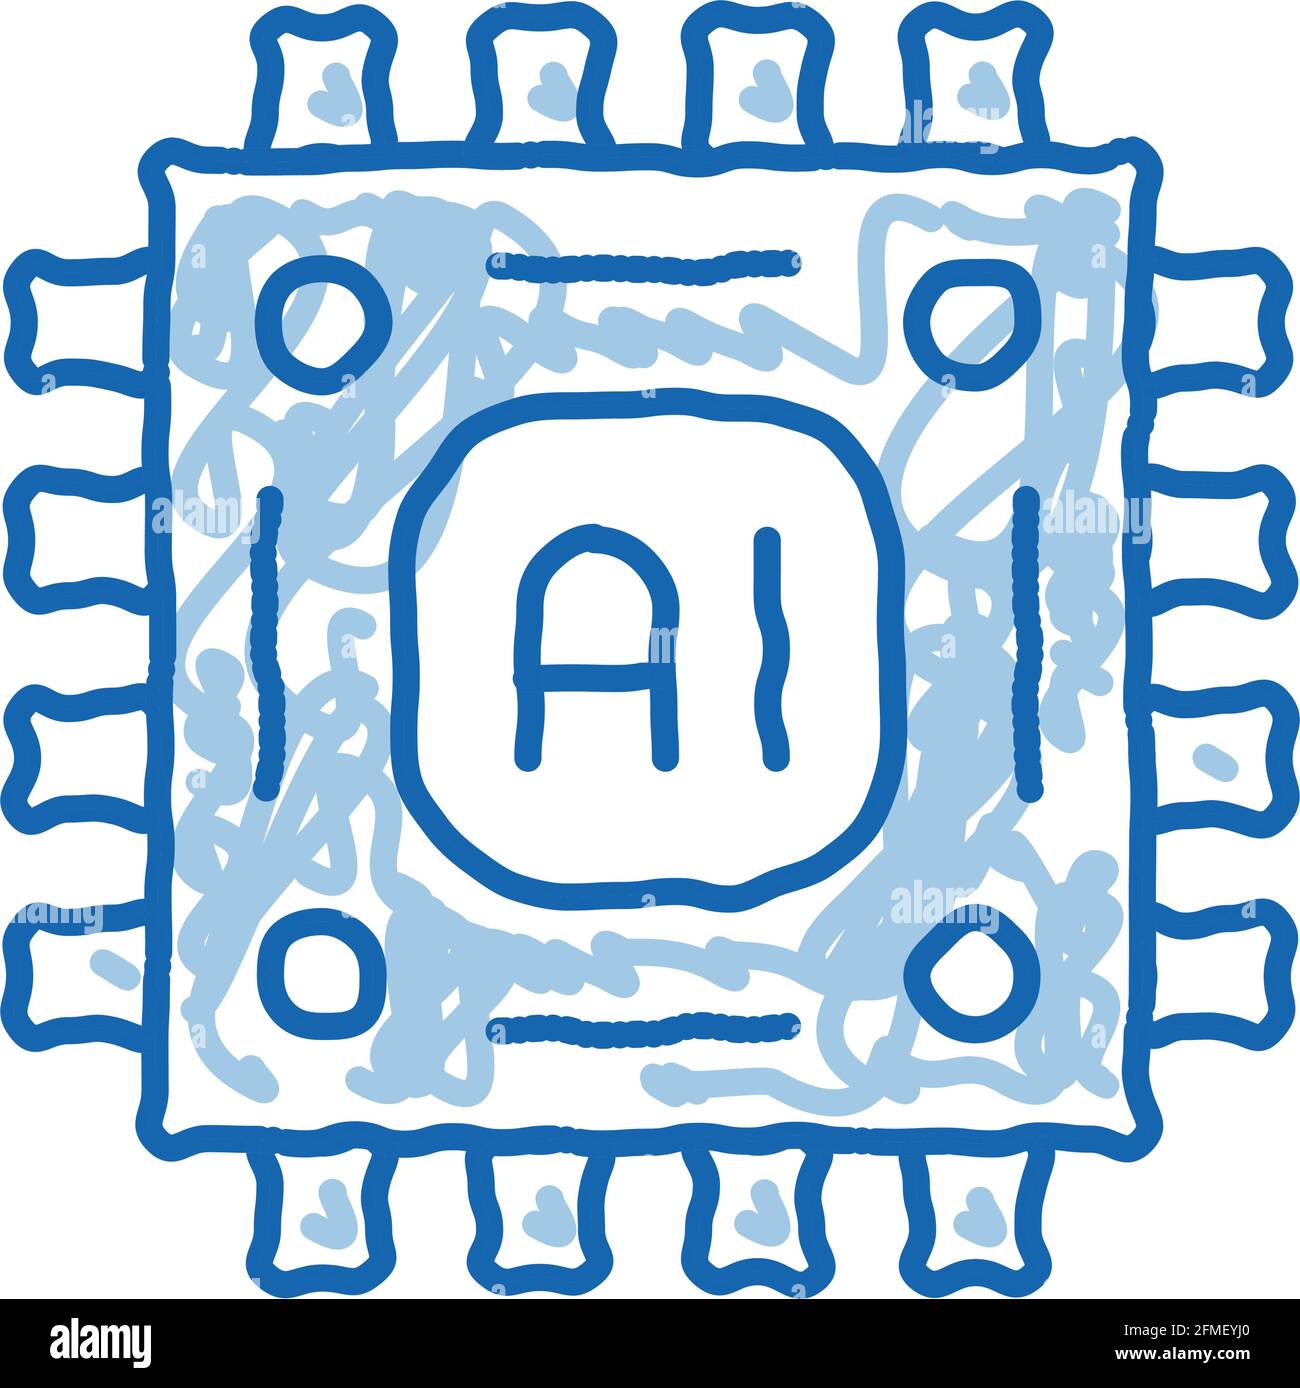 Artificial Intelligence Microchip doodle icon hand drawn illustration Stock Vector